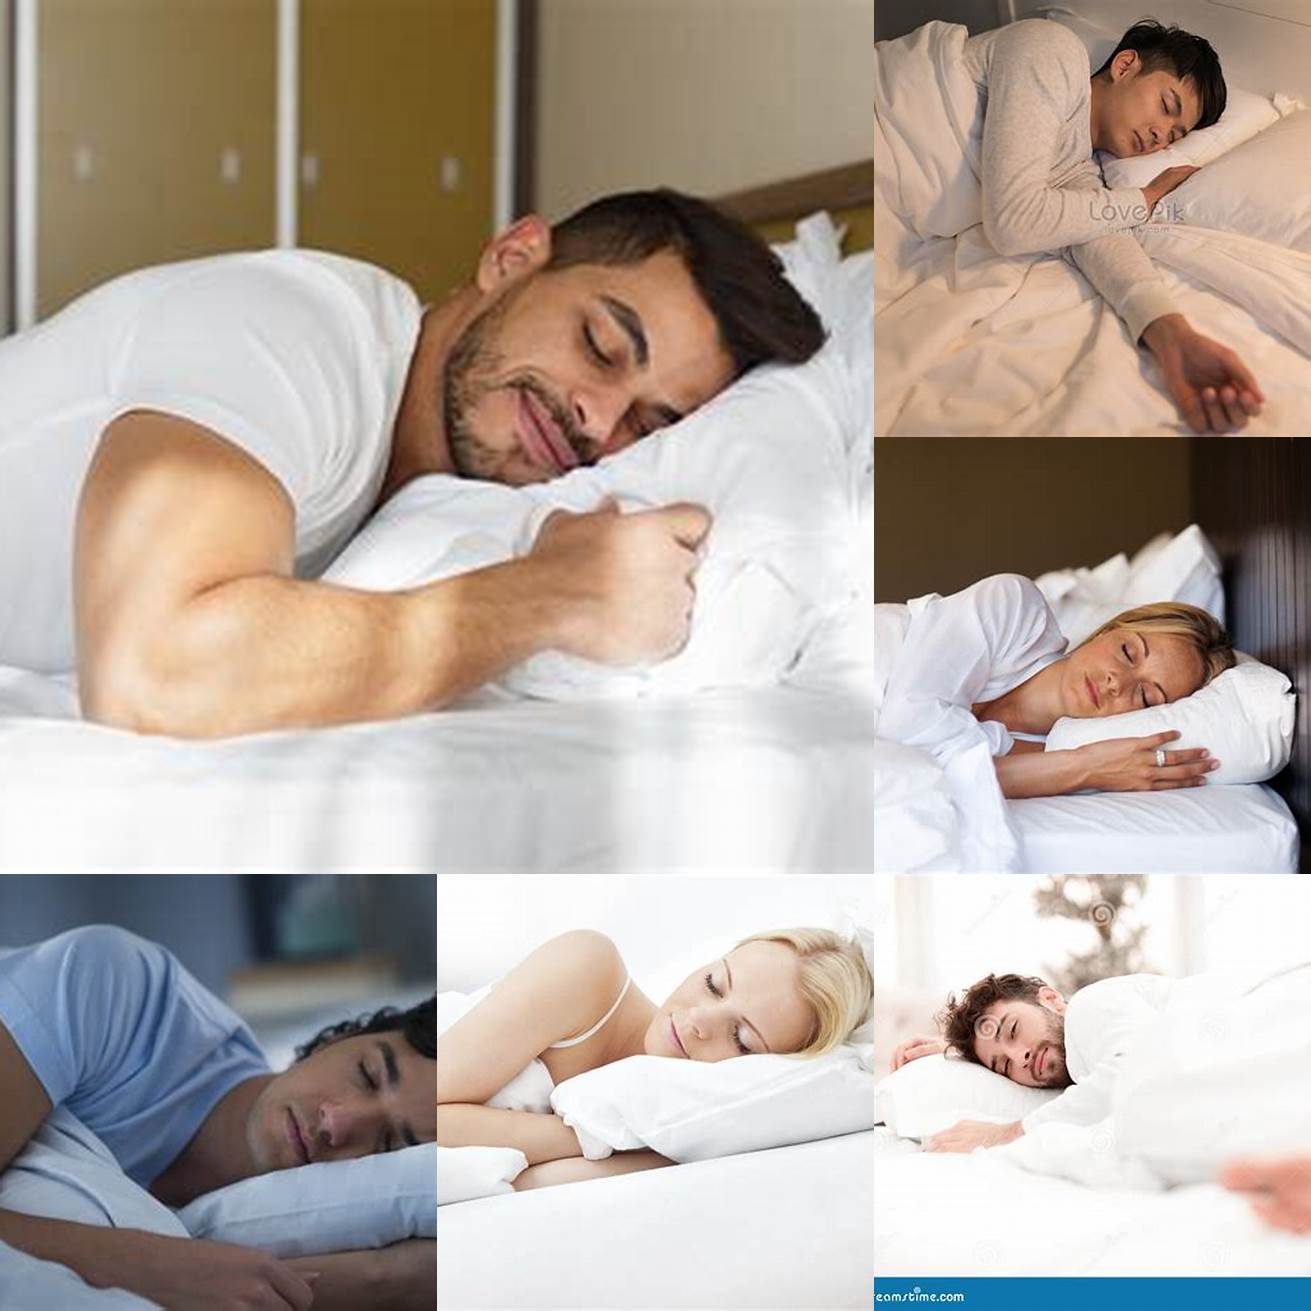 Image of a person sleeping soundly on high-quality bedding